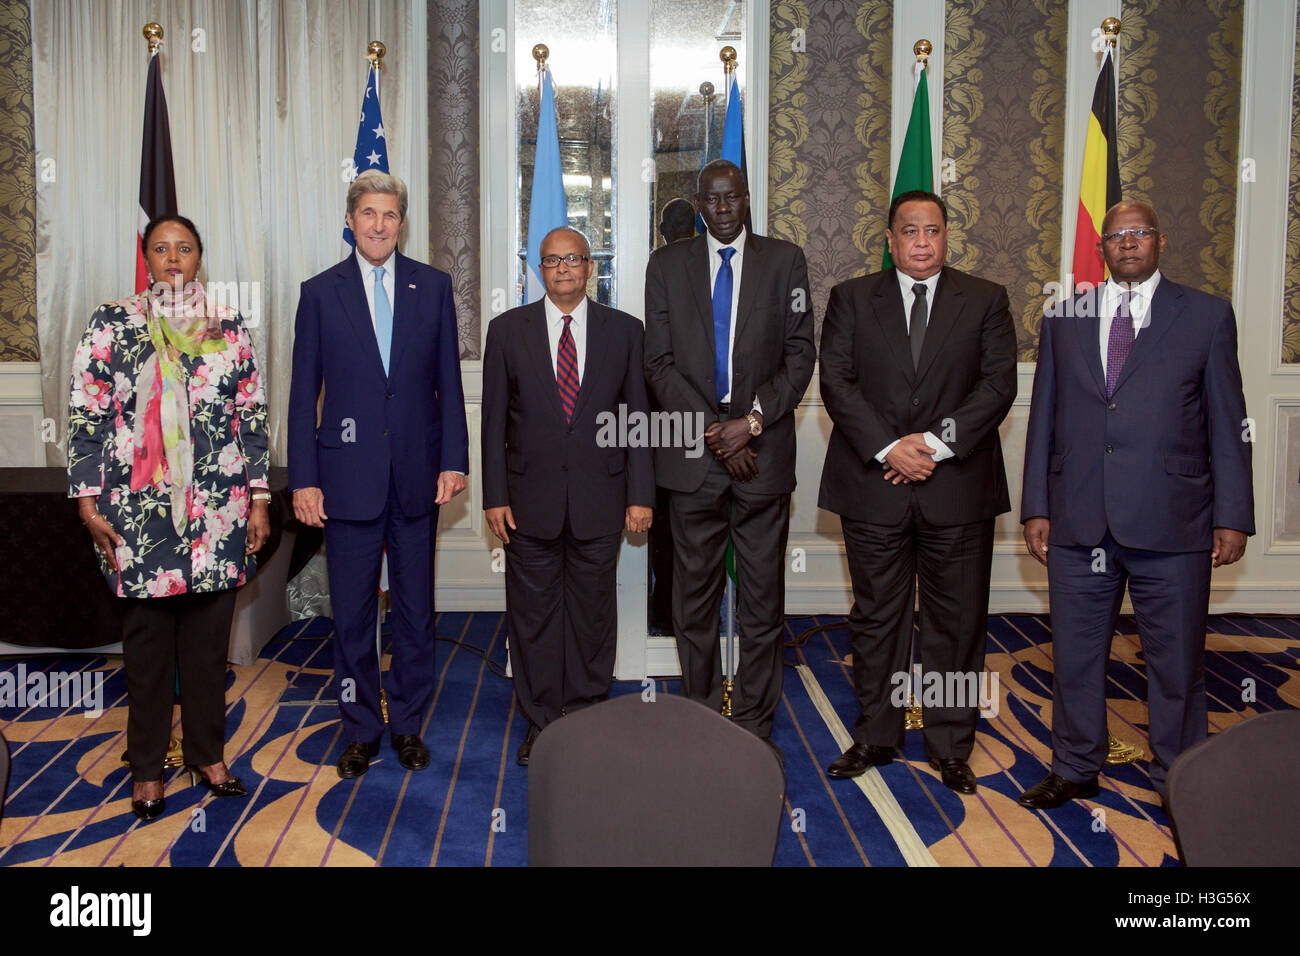 U.S. Secretary of State John Kerry poses with his fellow Foreign Ministers - Kenyan Foreign Secretary Amina Mohamed, Somalia Foreign Minister Abdisalam Omer, South Sudan Foreign Minister Deng Alor Kuol, Sudan Foreign Minister Ibrahim Ghandour, and Uganda Foreign Minister Sam Kahamba Kutesa - after a meeting and working lunch and focused on Somalia and South Sudan on August 22, 2016, at the Villa Rosa Kempinski Hotel in Nairobi, Kenya, Stock Photo